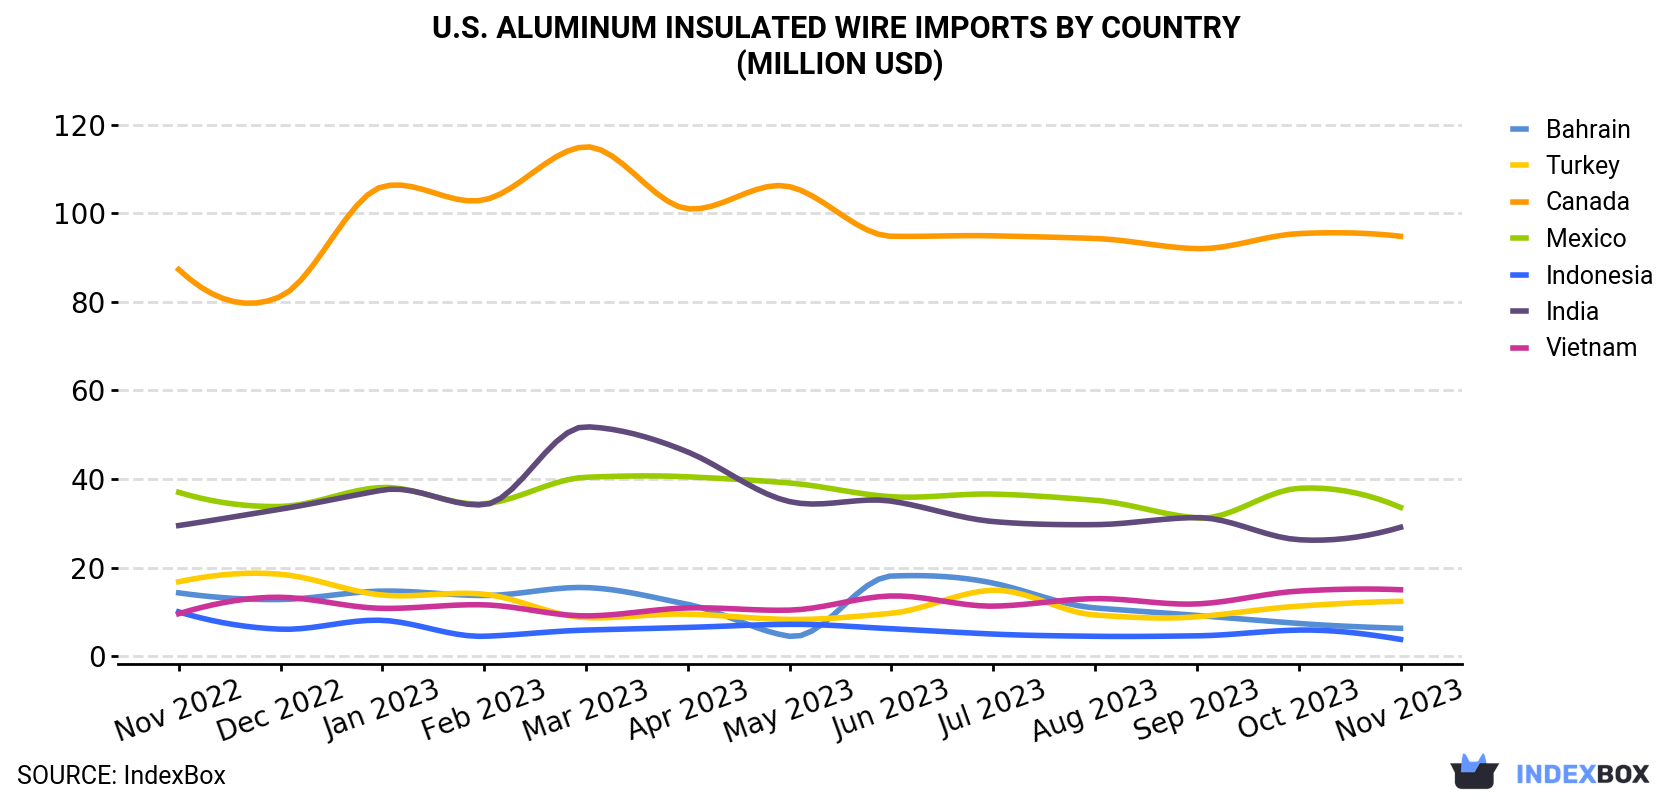 U.S. Aluminum Insulated Wire Imports By Country (Million USD)